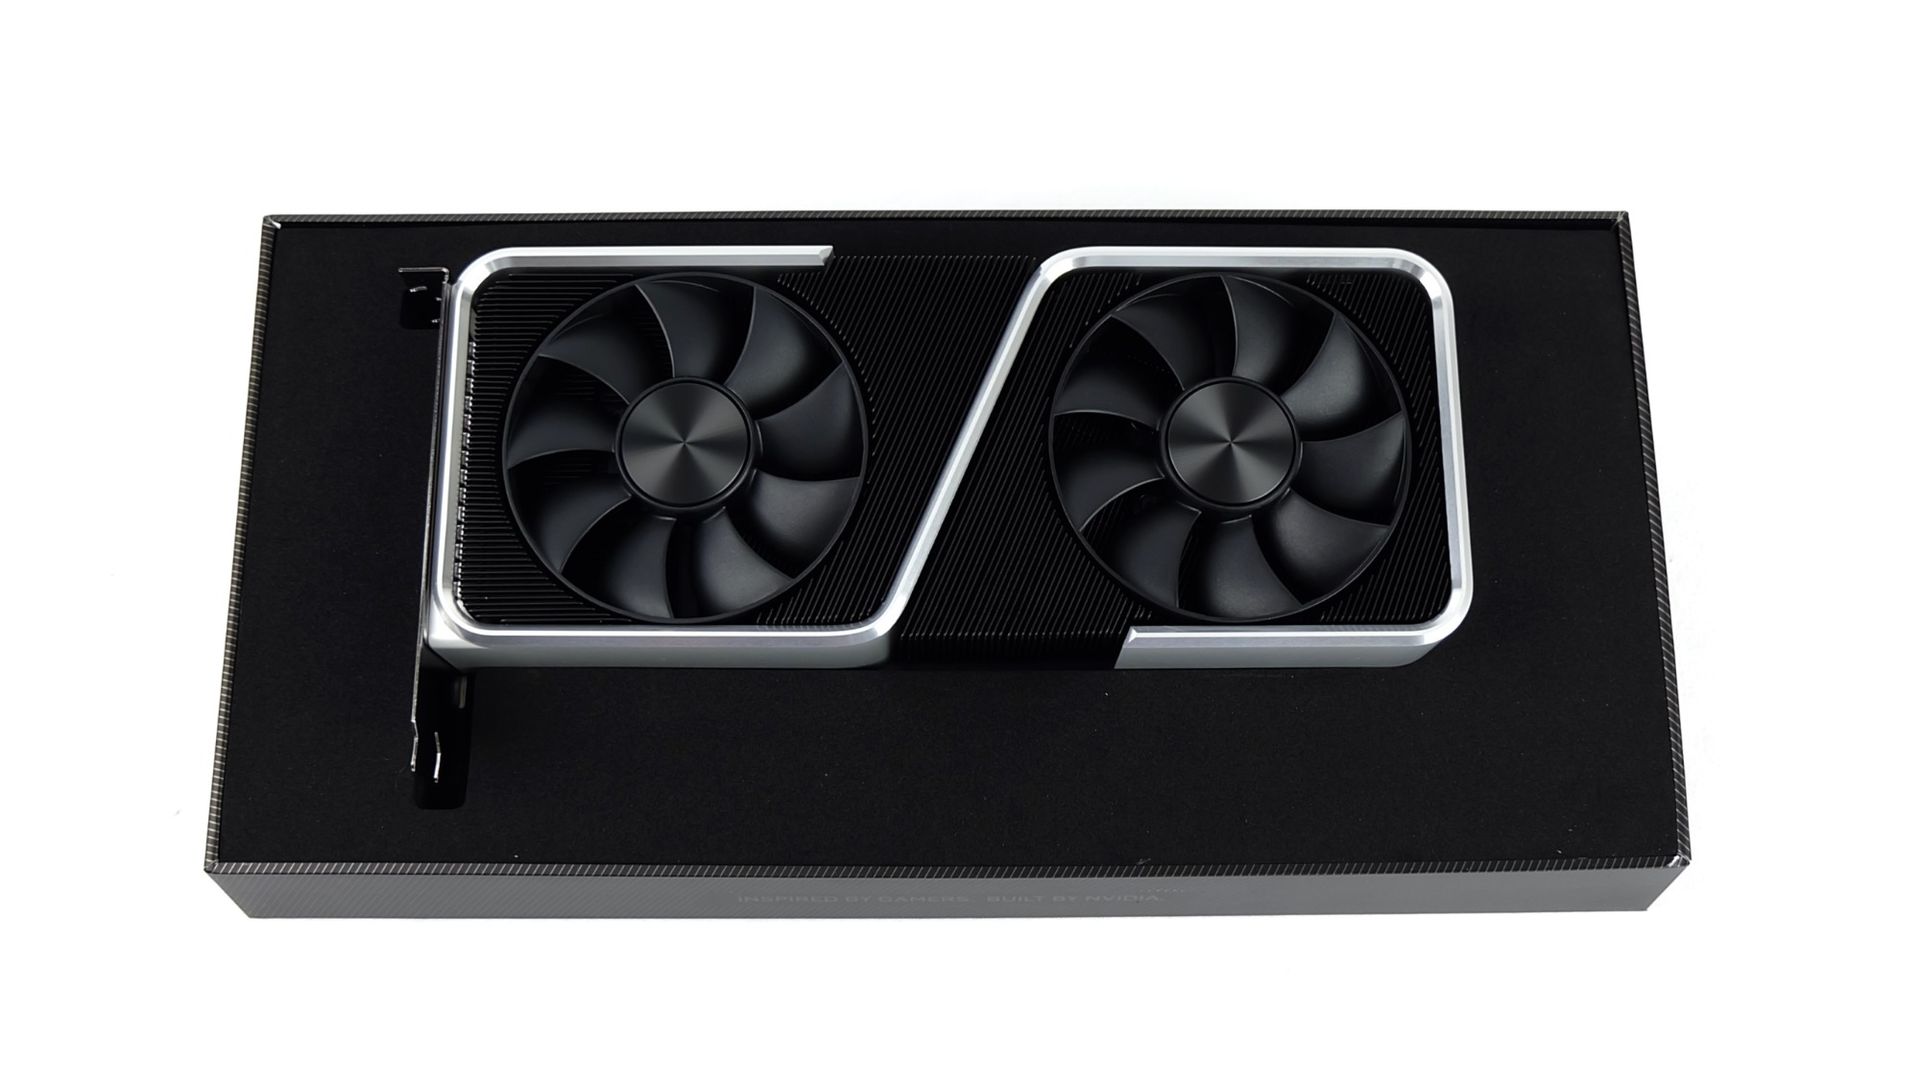 NVIDIA GeForce RTX 3060 Ti Founder's Edition Review - Introduction 